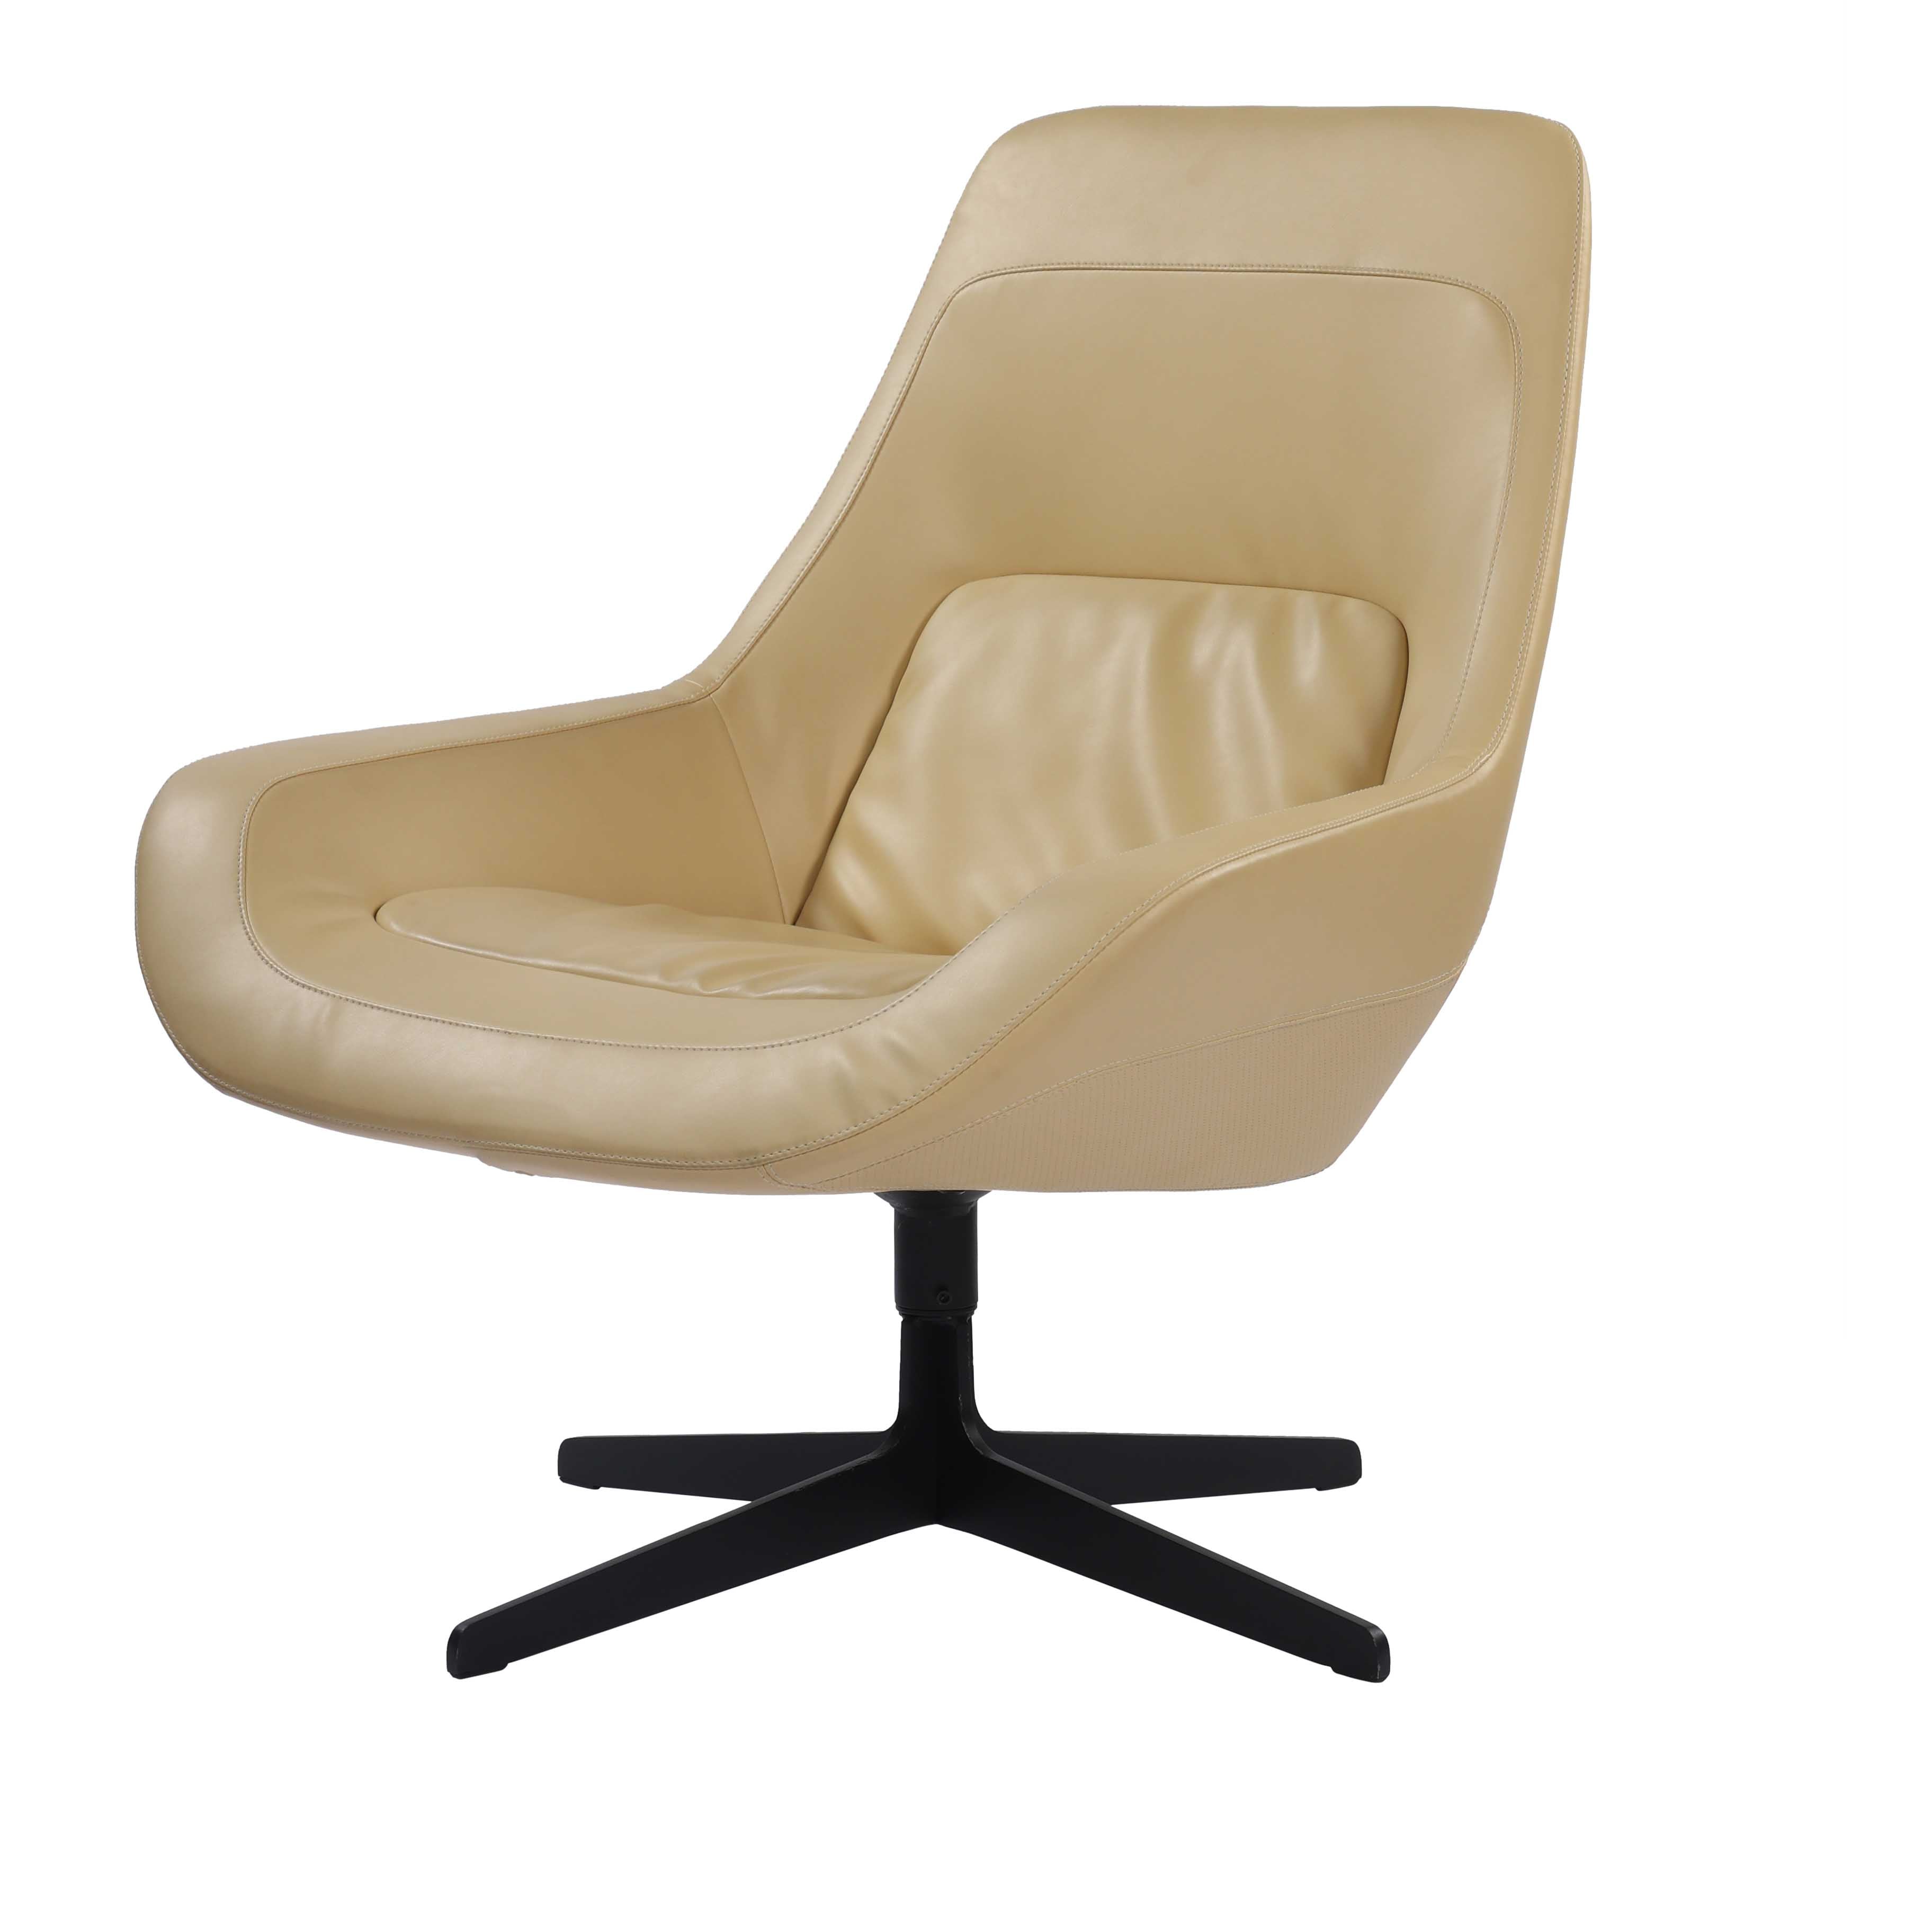 Olivia Leather Upholstered Lounge Armchair Chair with Ottoman Footrest - Beige